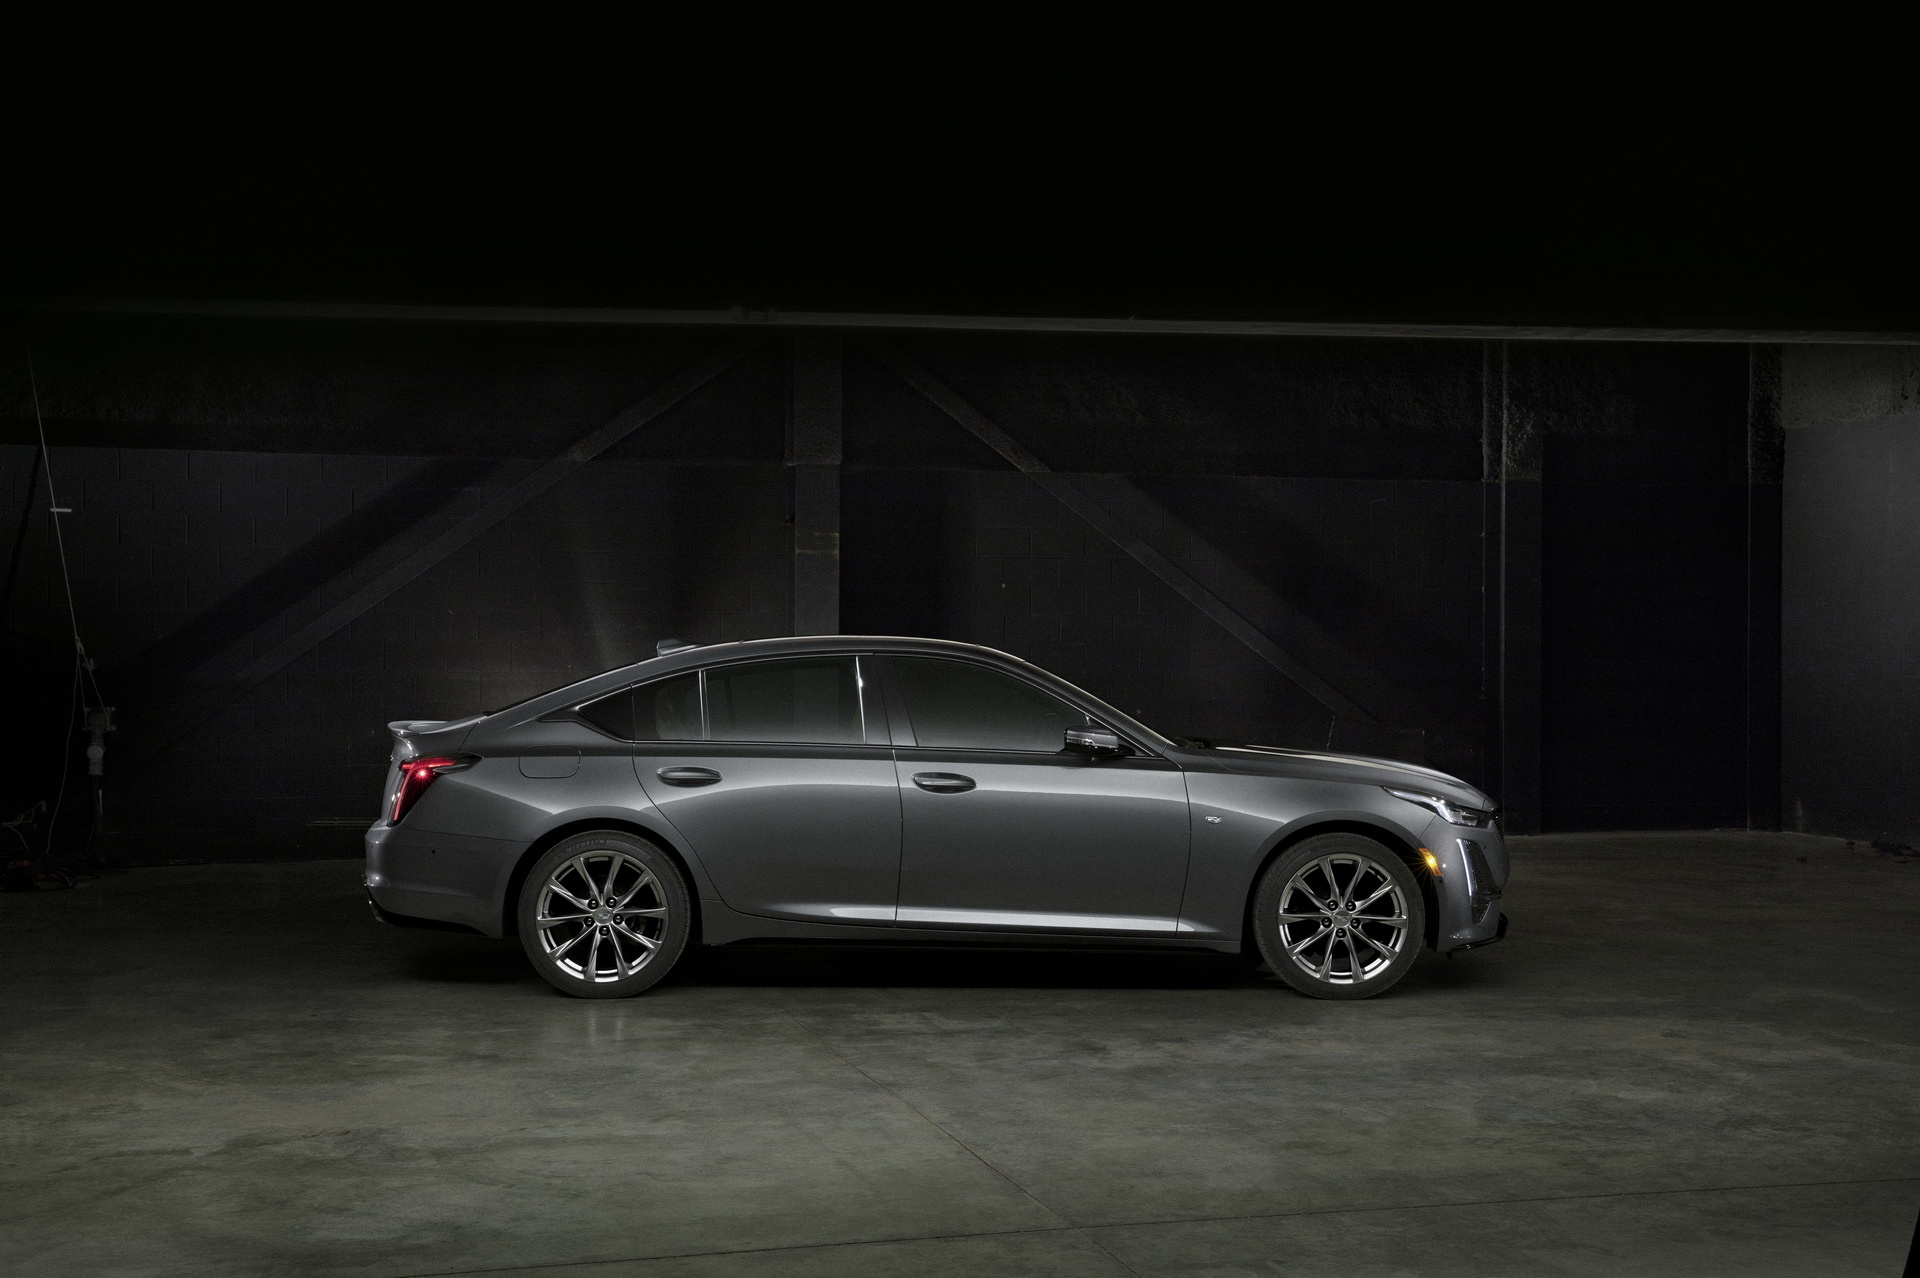 Cadillac CT5, Sport edition, New V performance package, Carscoops review, 1920x1280 HD Desktop